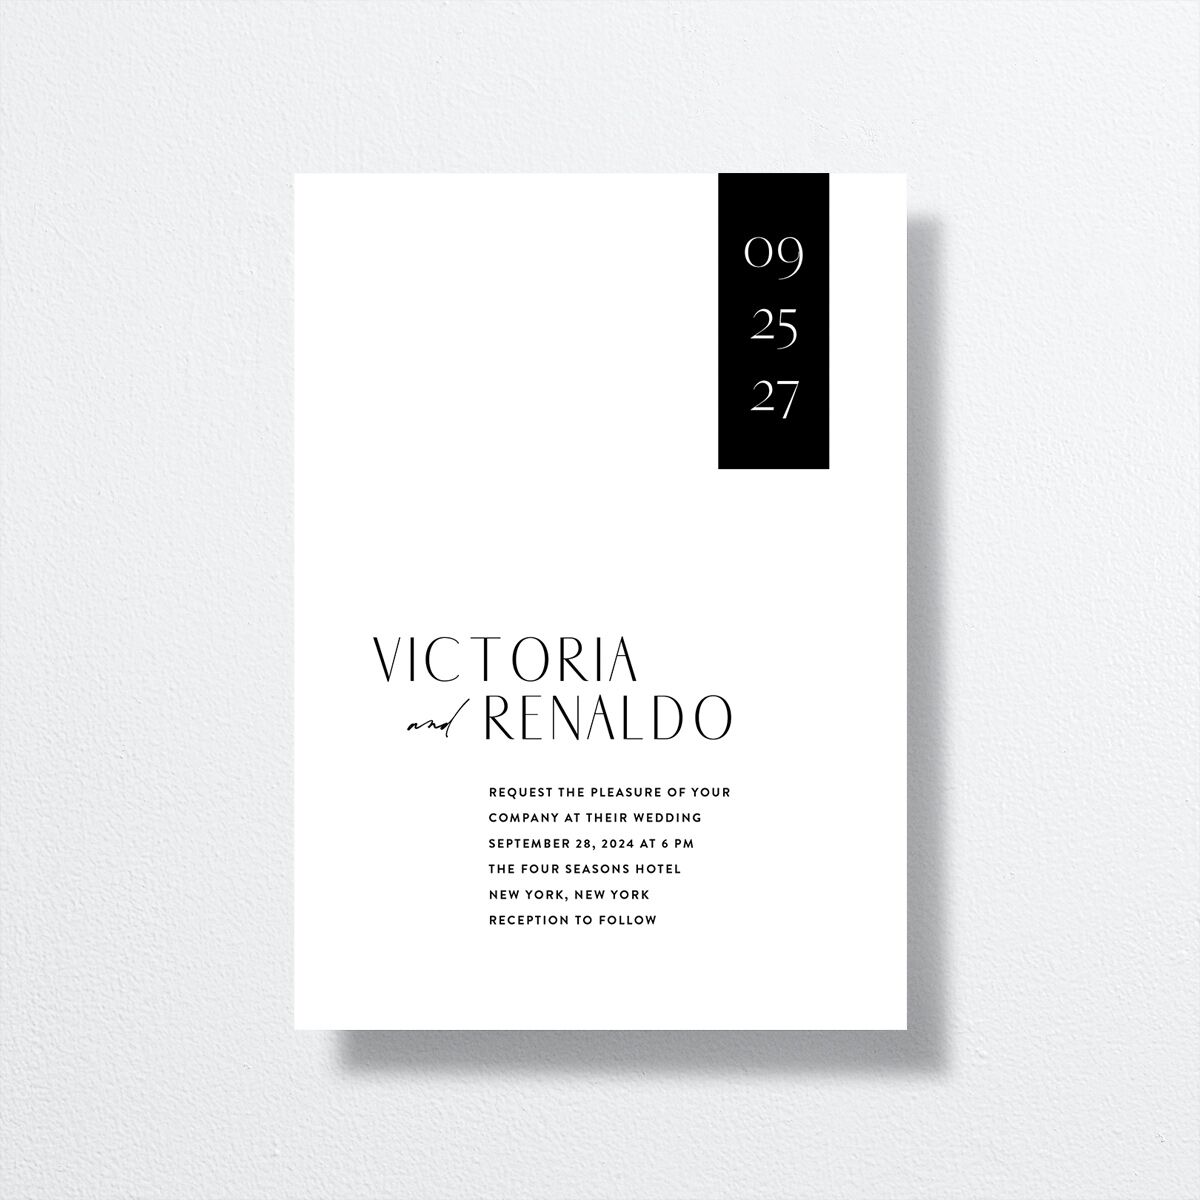 Our Time Wedding Invitations by Vera Wang front in white